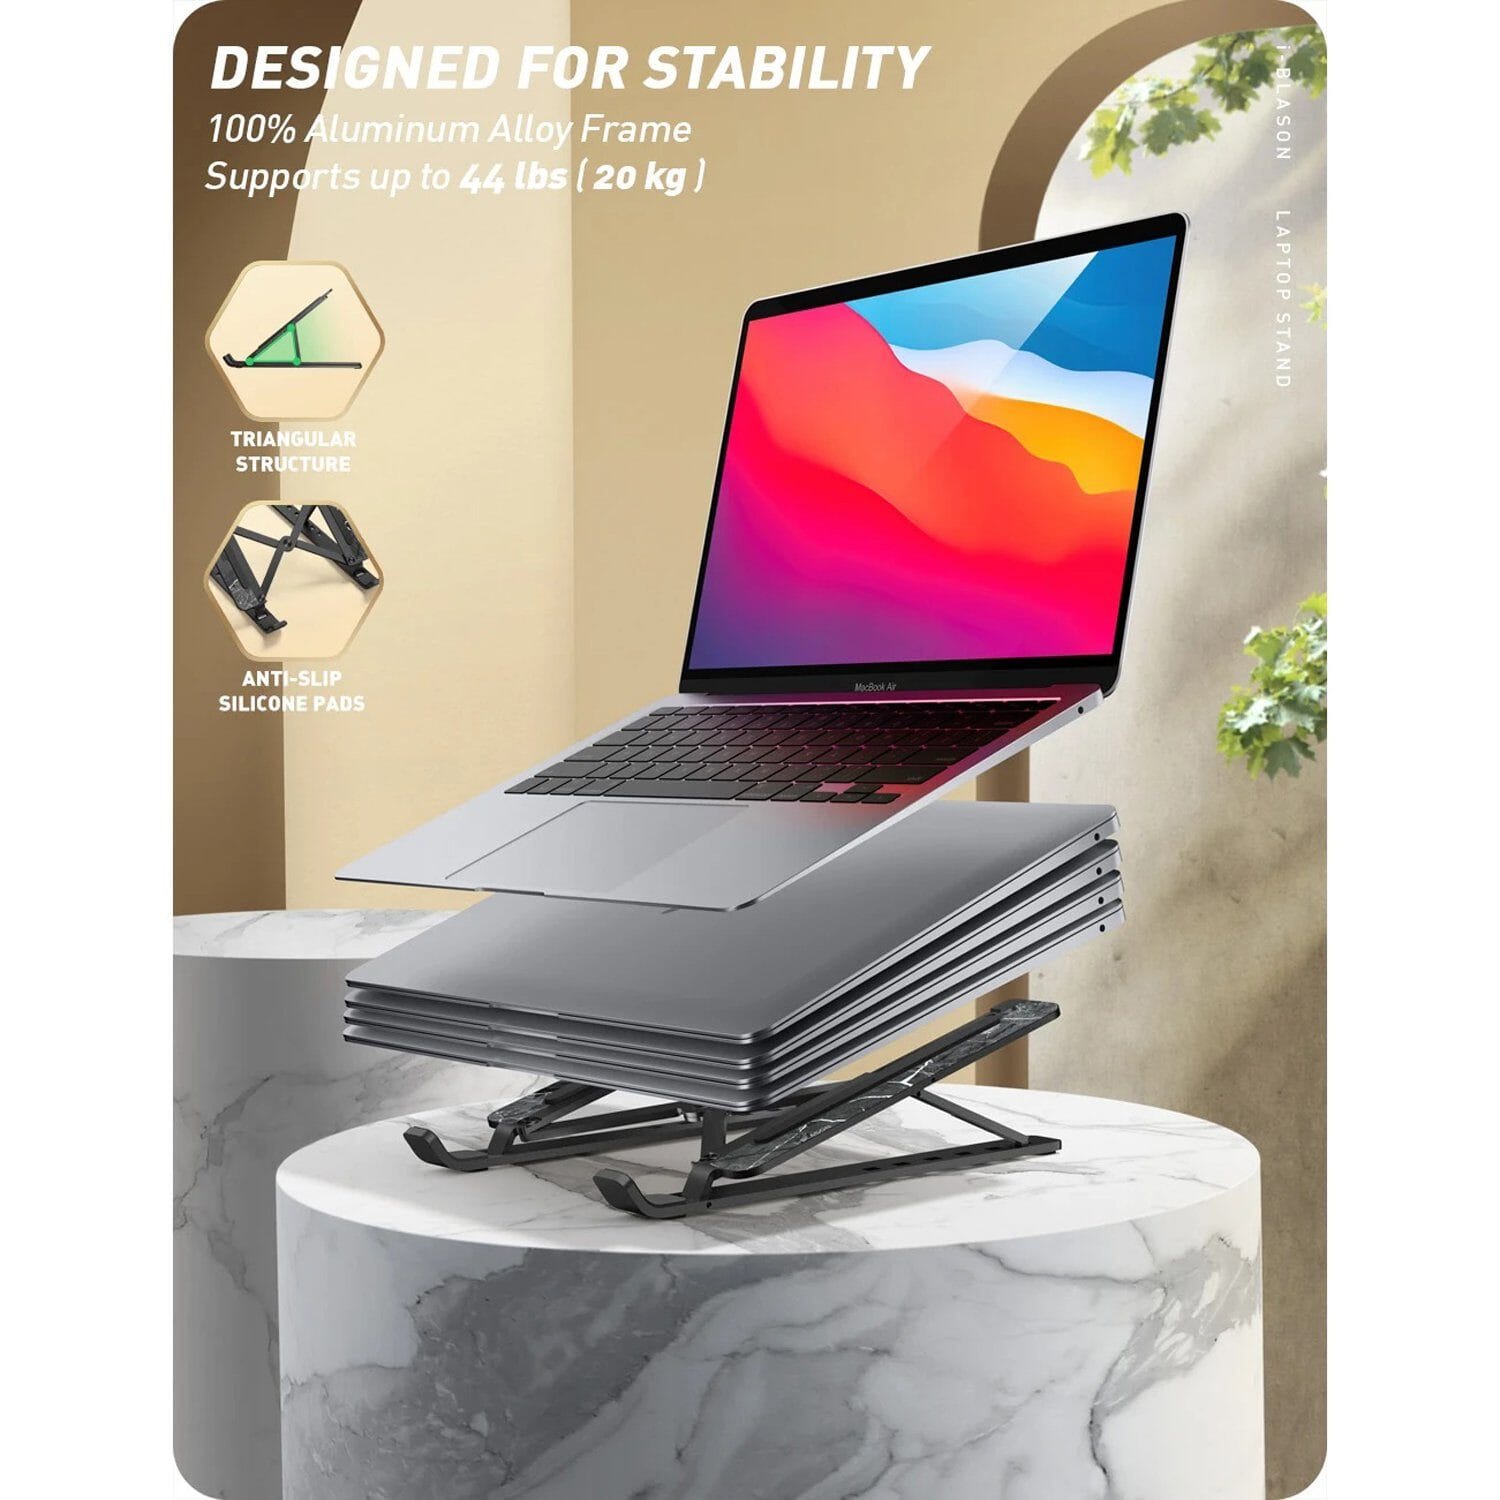 i-Blason Cosmo Series Adjustable Laptop Stand, Portable Computer Stand Aluminum Alloy Laptop Riser Holder with Multi-Angle Stand Suitable for 7-17.3" Laptops and Tablets Default i-Blason 